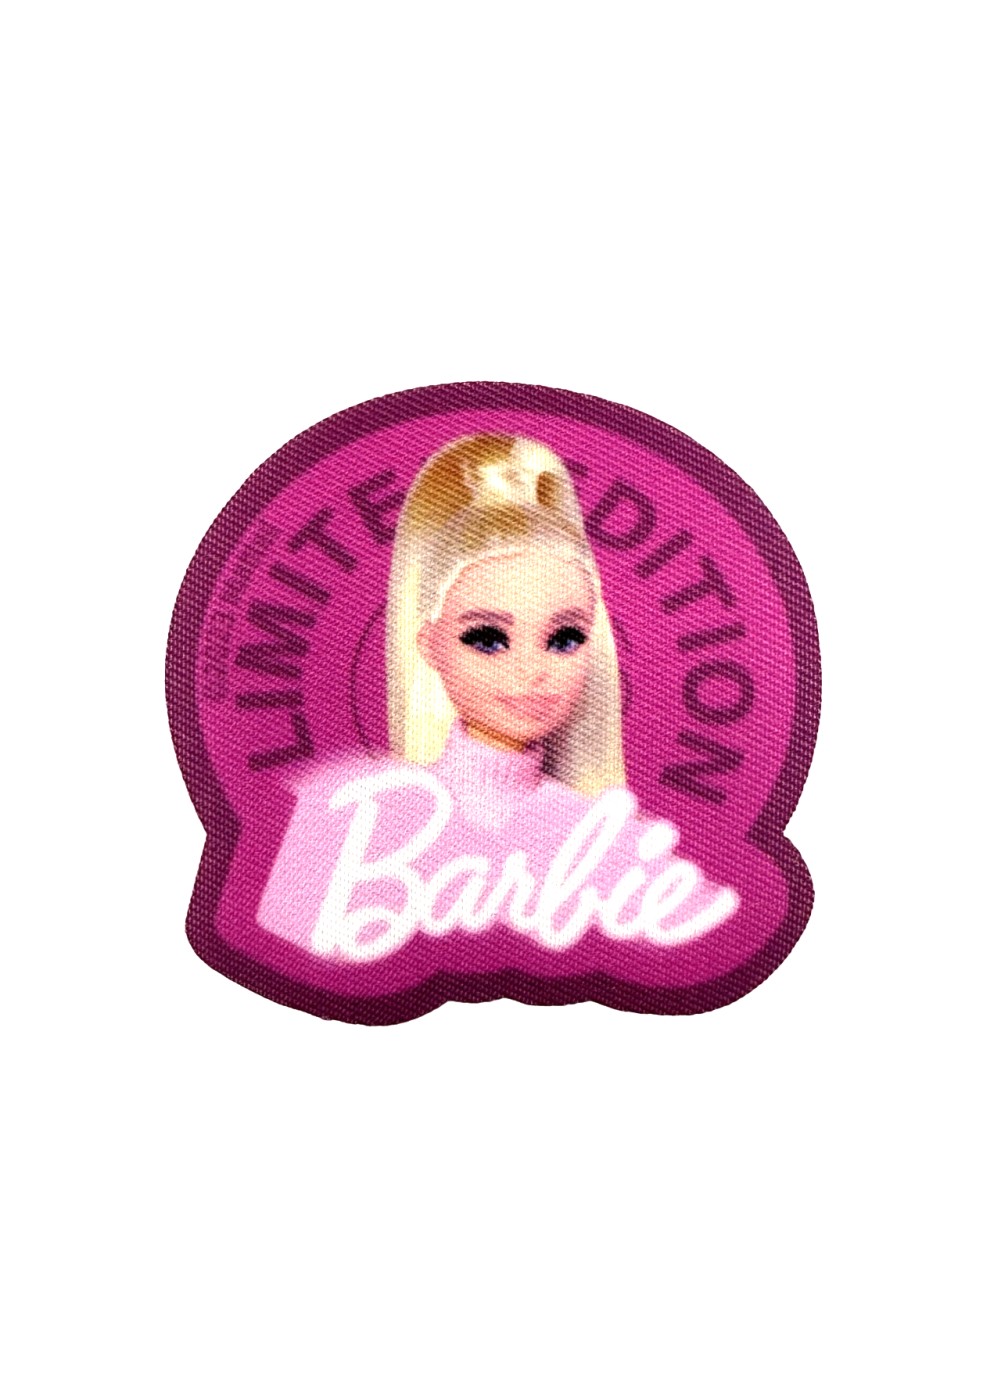 Barbie Embroidery Iron on Patch 